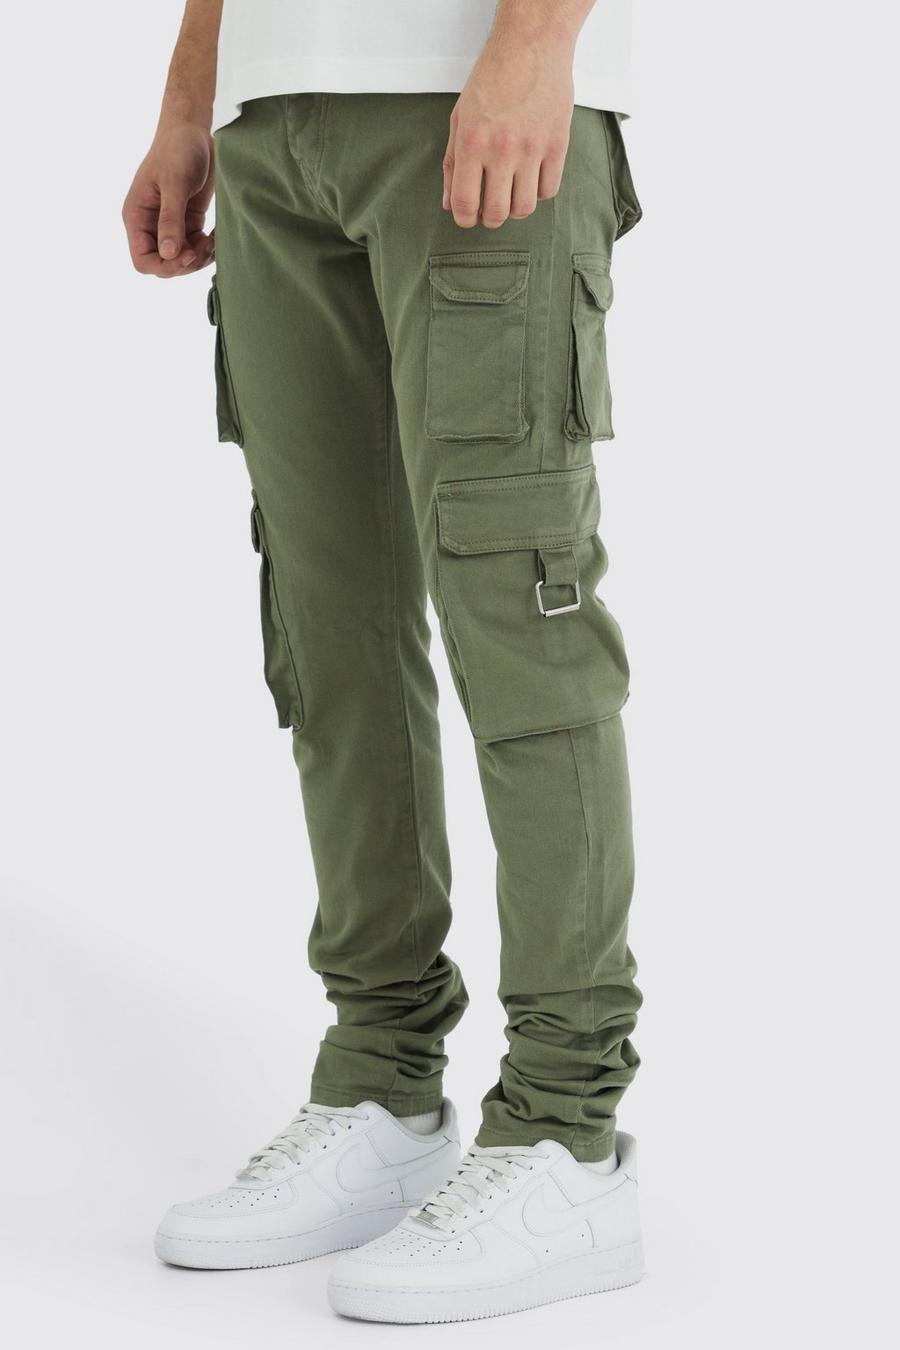 Olive Tall Fixed Waist Skinny Stacked Multi Cargo Pants